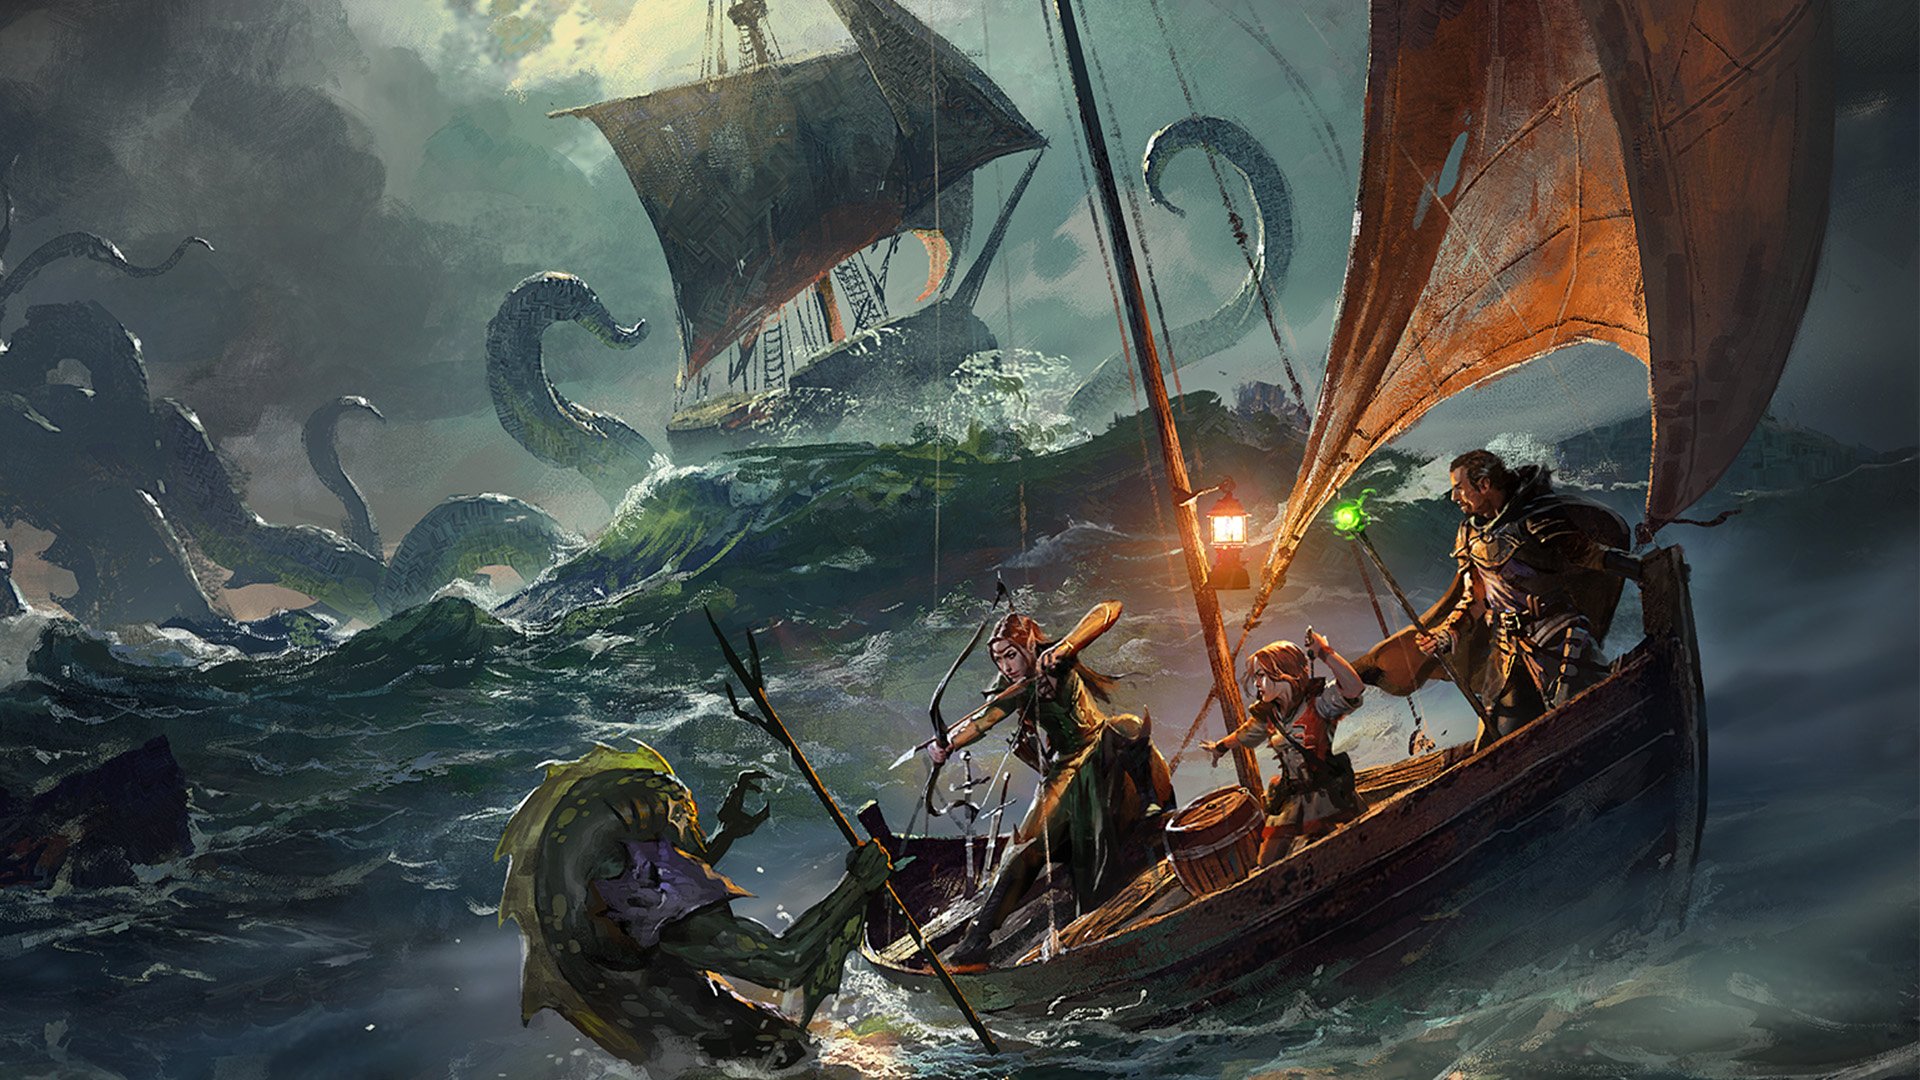 DnD Cleric 5E - Wizards of the Coast artwork showing a ship at sea, attacked by a tentacled monster